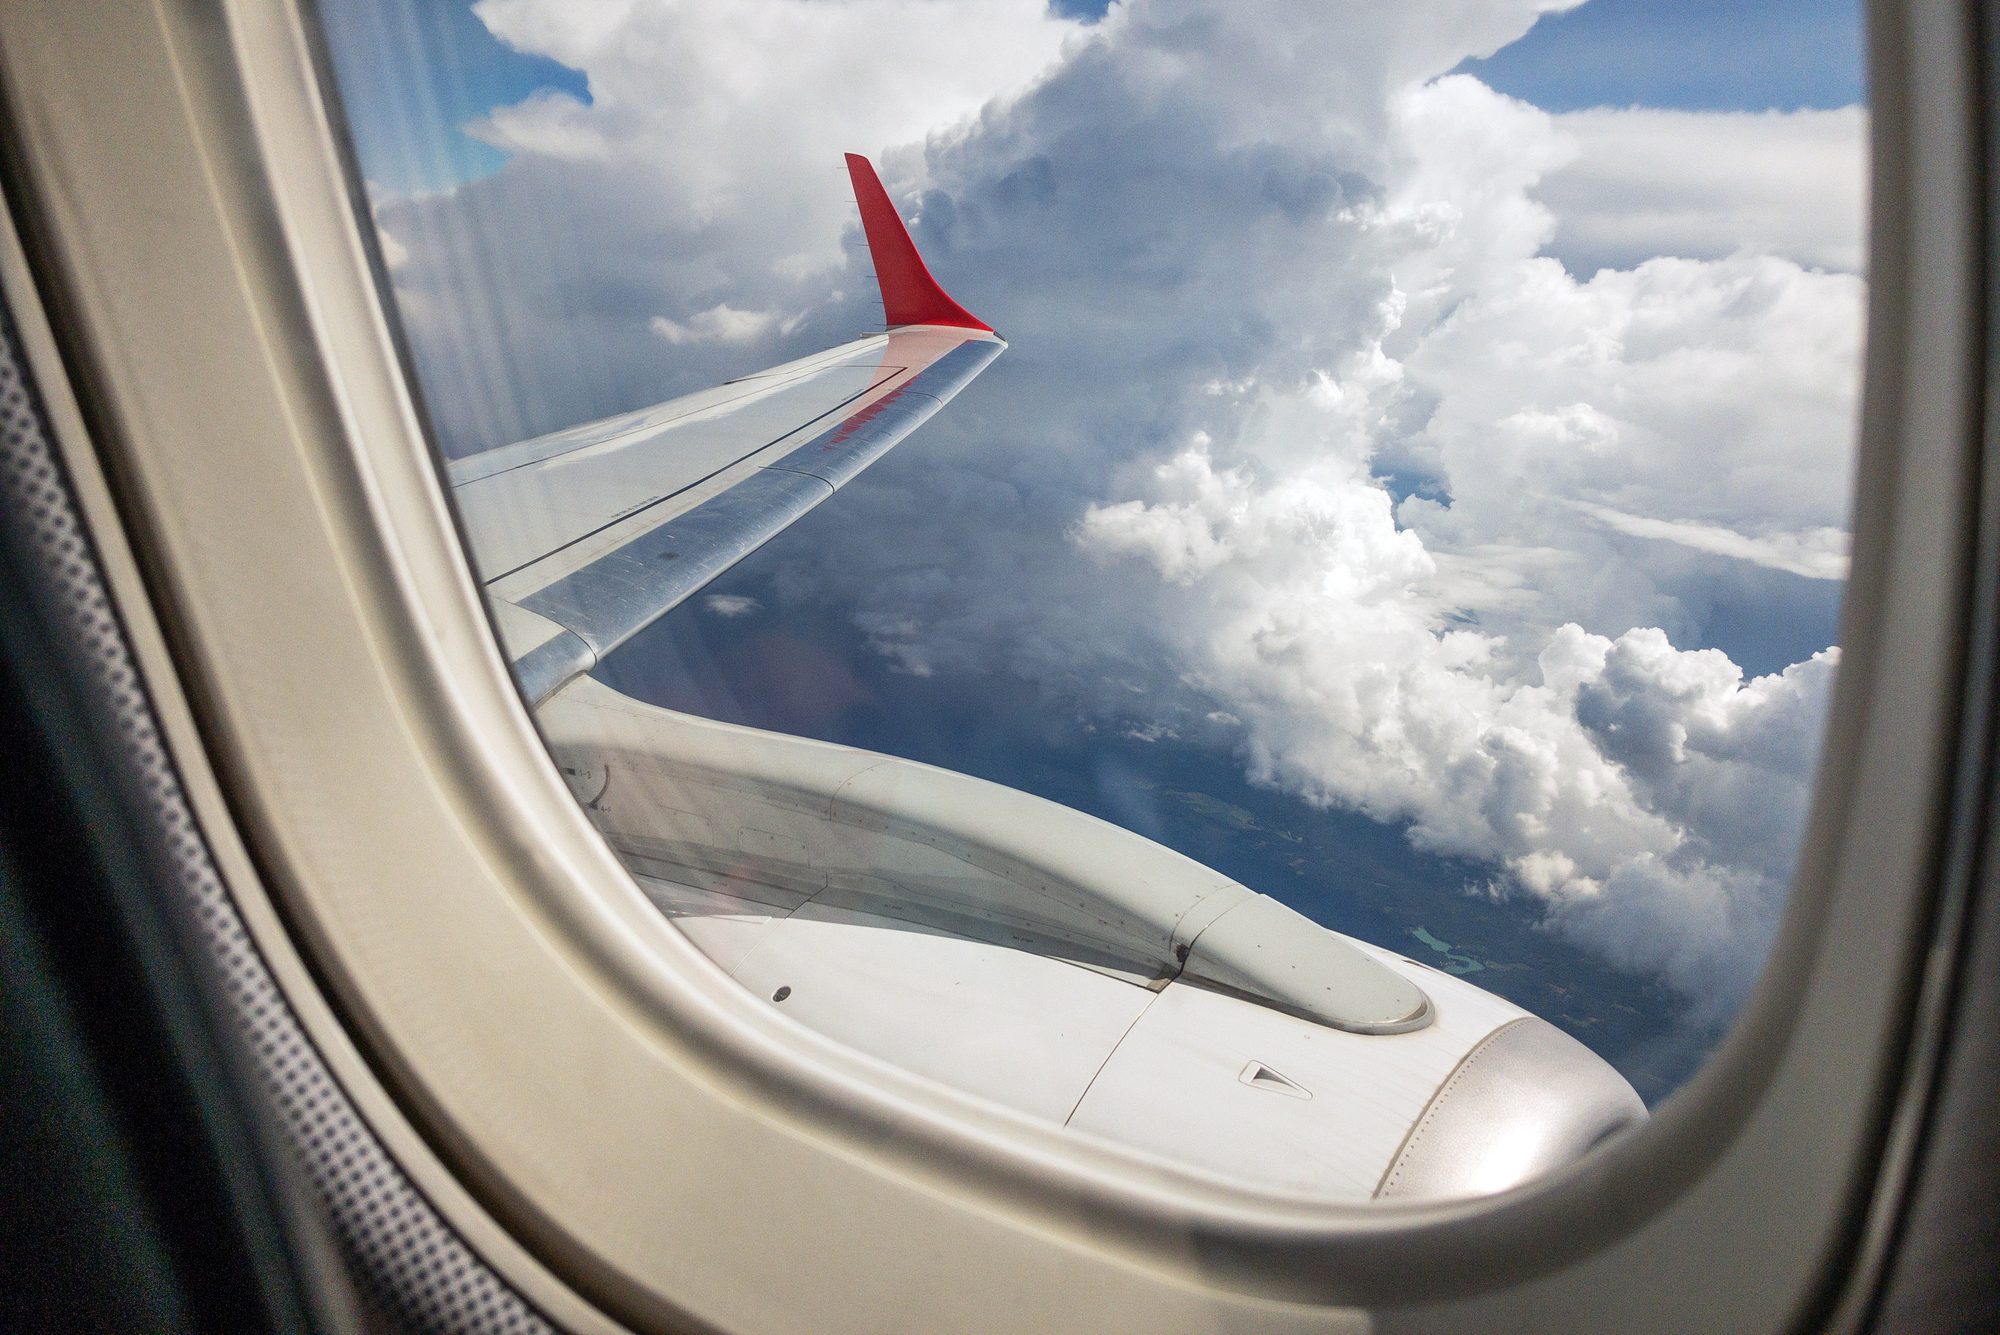 <p><a href="https://www.rd.com/article/what-is-turbulence/" rel="noopener noreferrer">Normal turbulence</a> is expected and usually not jarring for most seasoned crew members. But here's one of the flight attendant secrets you've probably never heard: There are times when it feels severe enough that even veteran fliers get anxious and scared. "It's OK to feel scared, but you can't let the passengers see it," says Olga P. "We are trained to stay calm, even if we don't feel calm." It's helpful for you, too, to stay calm and keep your feelings in check, she adds. "It only takes one person screaming to set off a whole plane in panic," she says.</p>